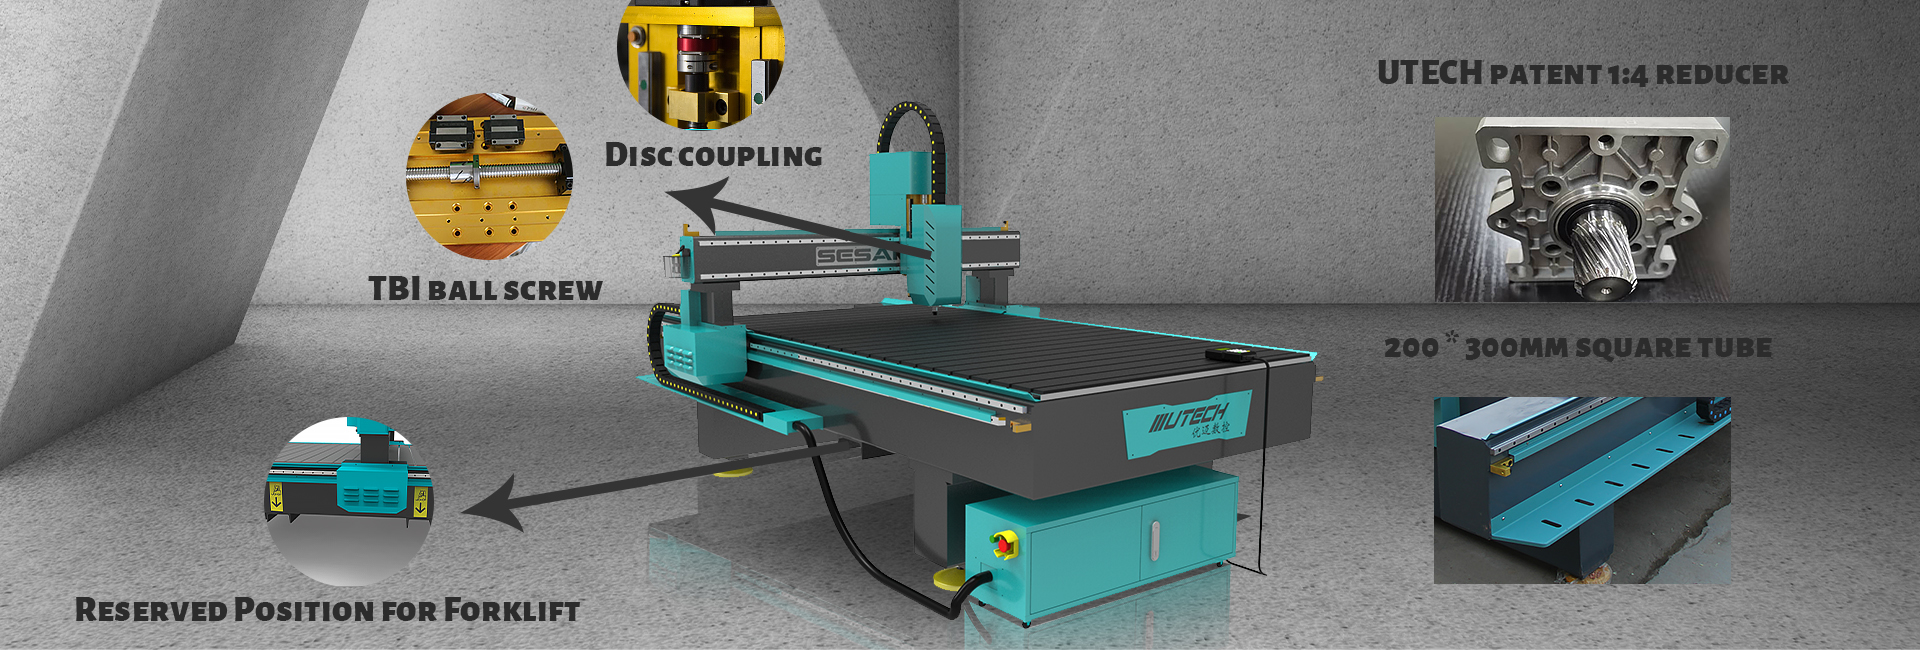 Customized Welding Cnc Router for Woodworking